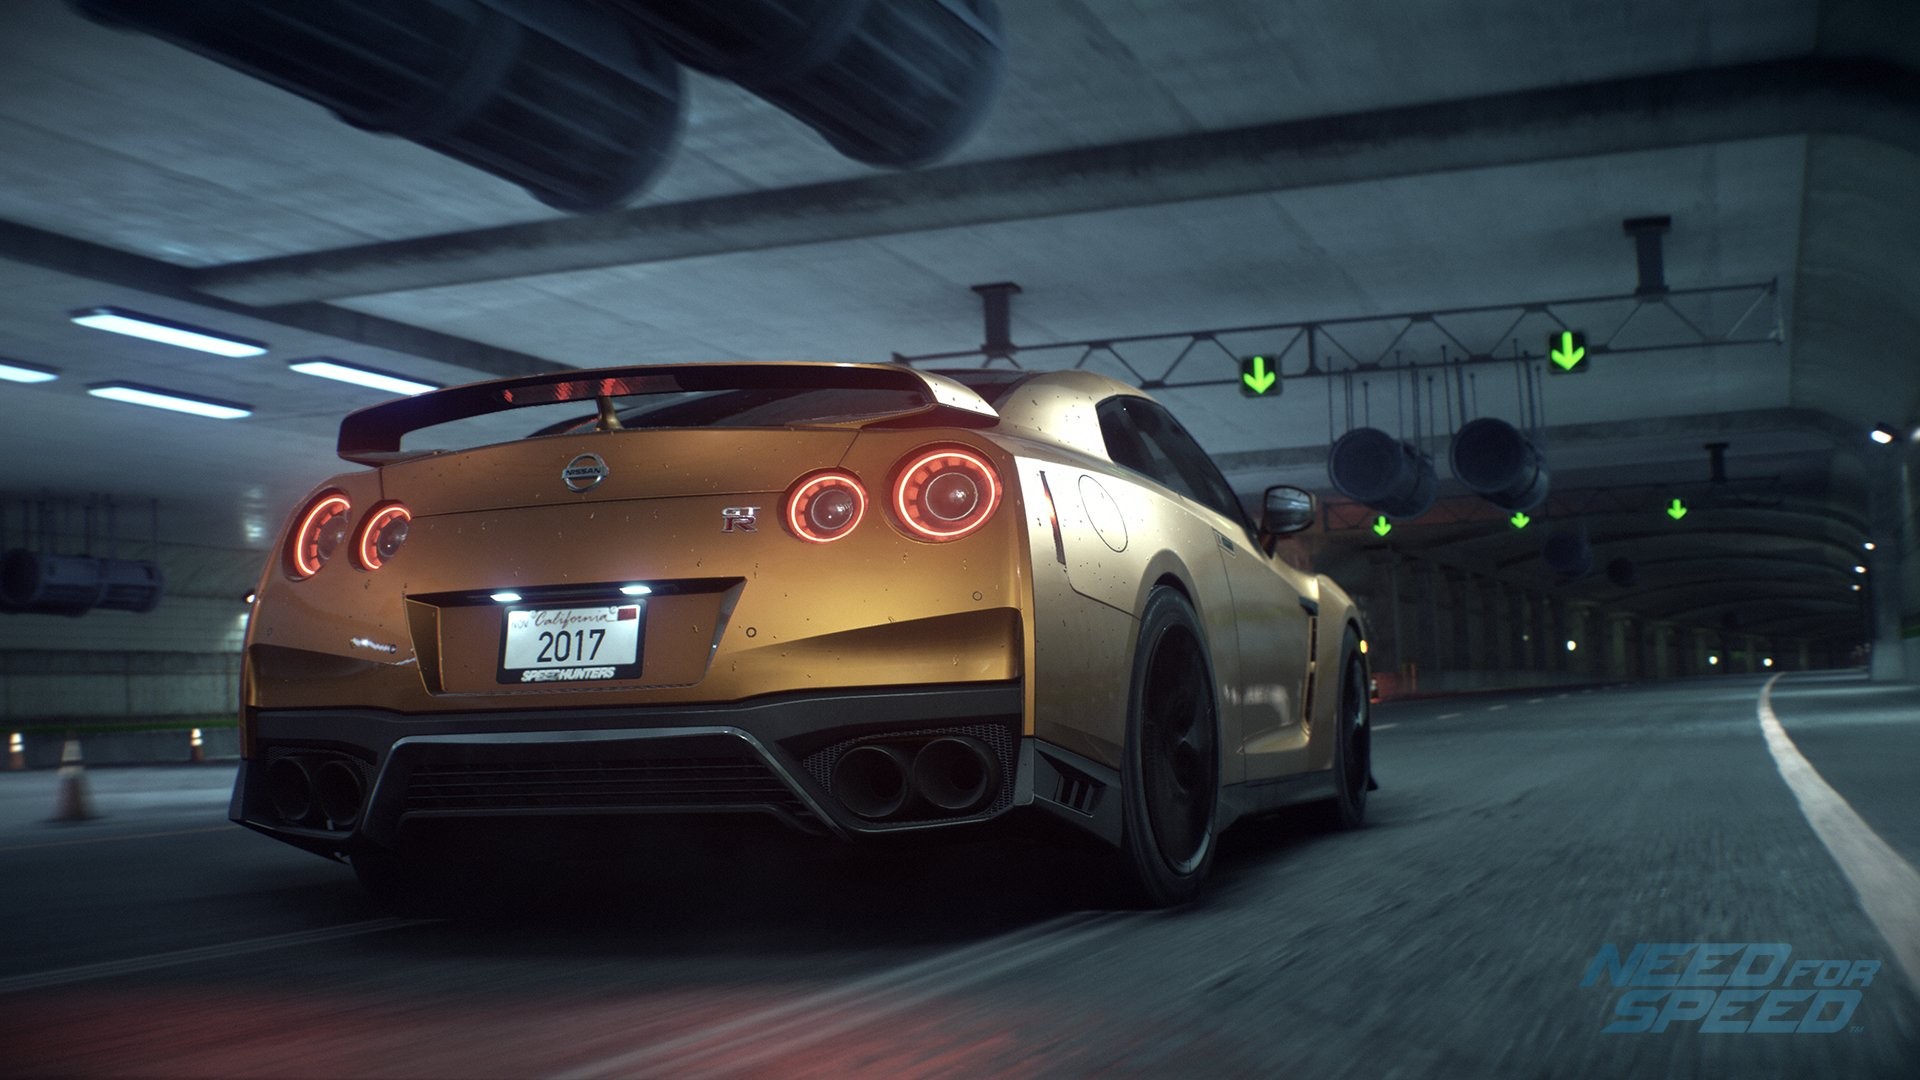 need For Speed 2016, Need For Speed, Car, PC Gaming, Nissan, Nissan GT